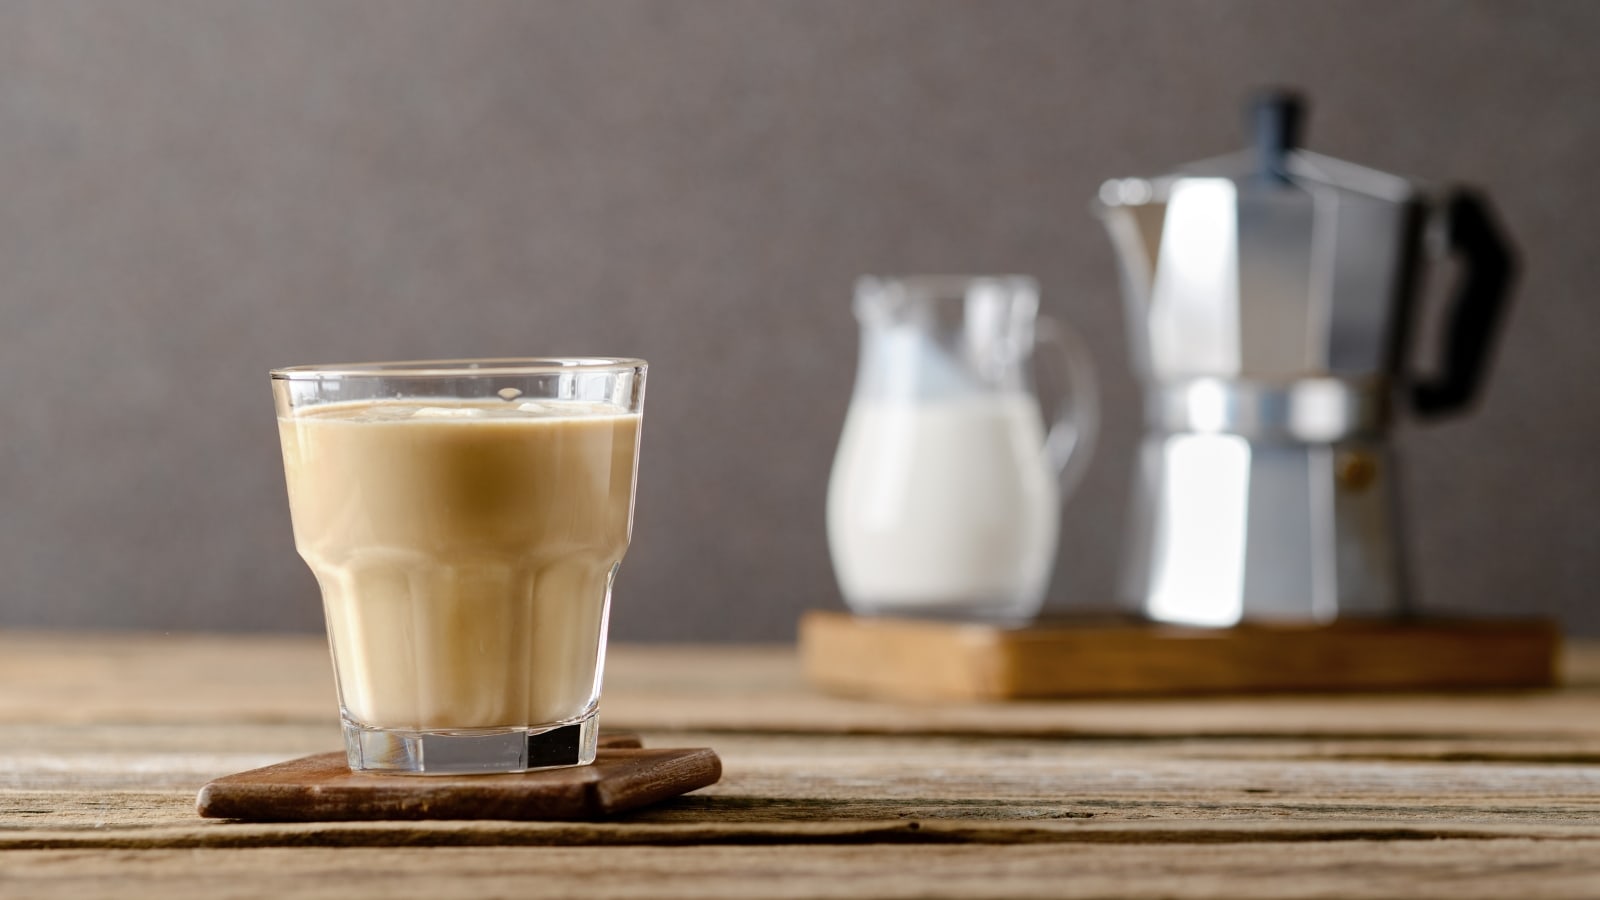 a glass of No-Foam Latte against the blurred Italian Coffee Pot and jug of milk